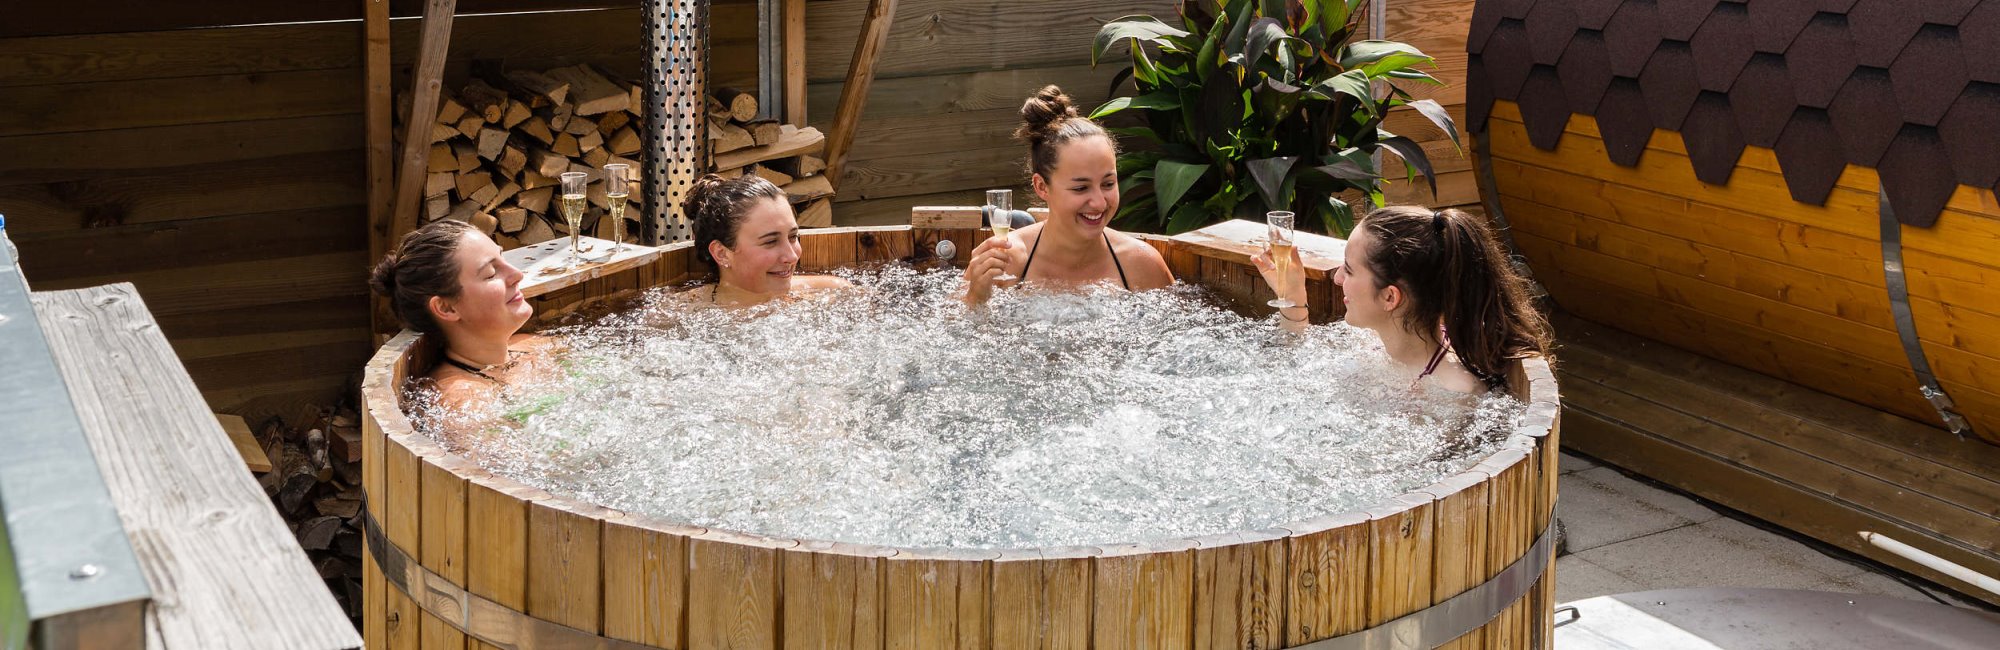 New on the Camping Lazy Rancho in Unterseen near Interlaken: hot tub and barrel sauna